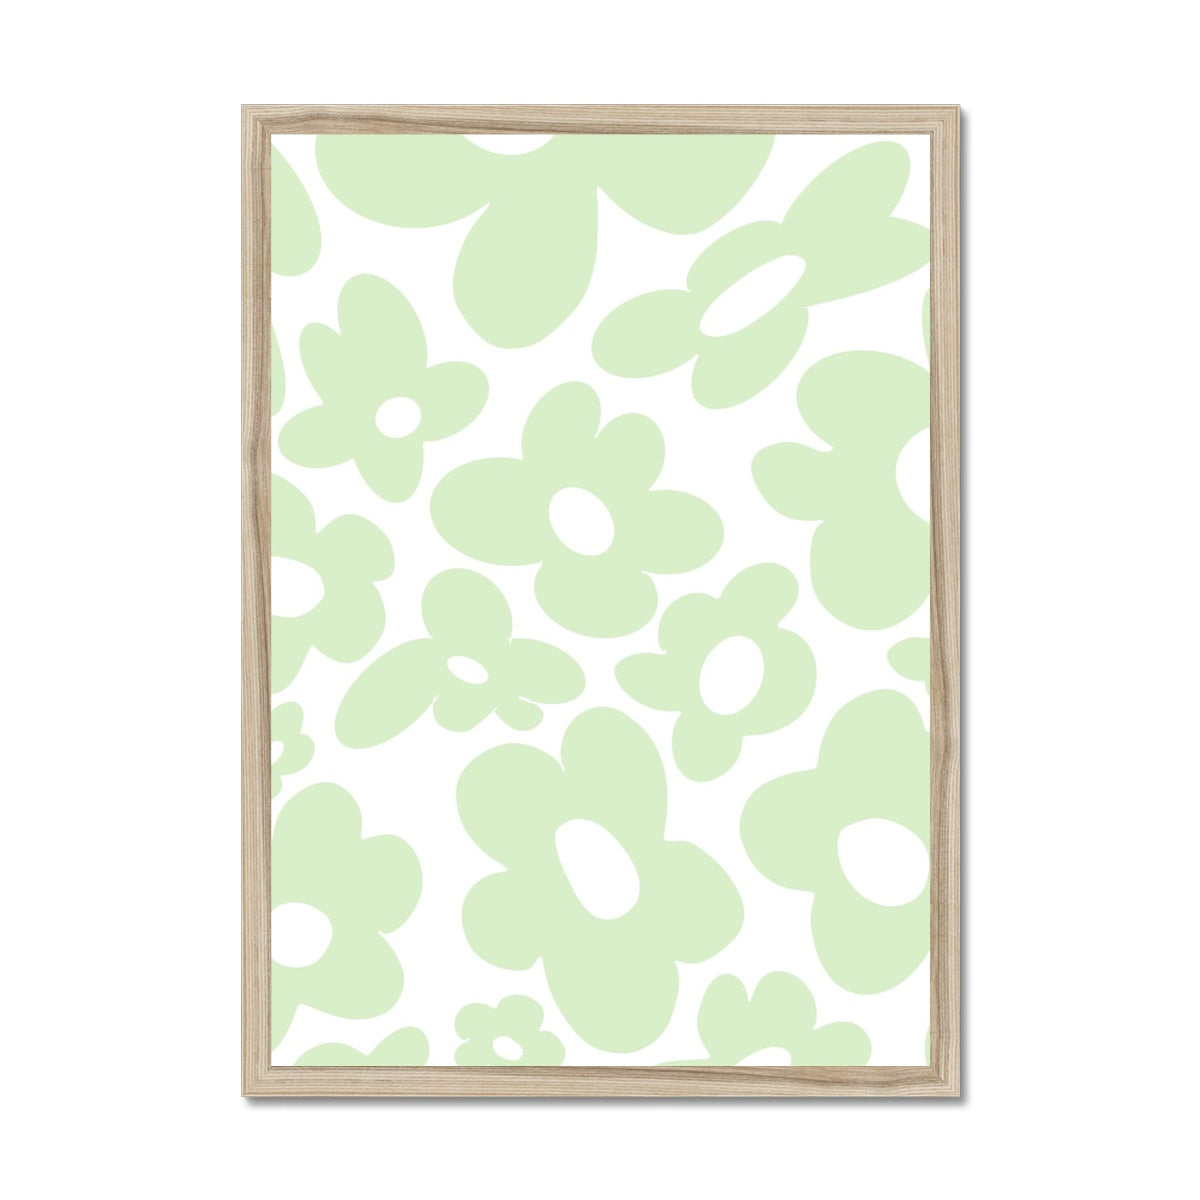 © les muses / Retro Flowers is a collection of wall art with groovy daisy prints in dreamy pastels with a trendy 70s aesthetic. Funky flower posters full of daisies perfect for danish pastel dorm and apartment decor.